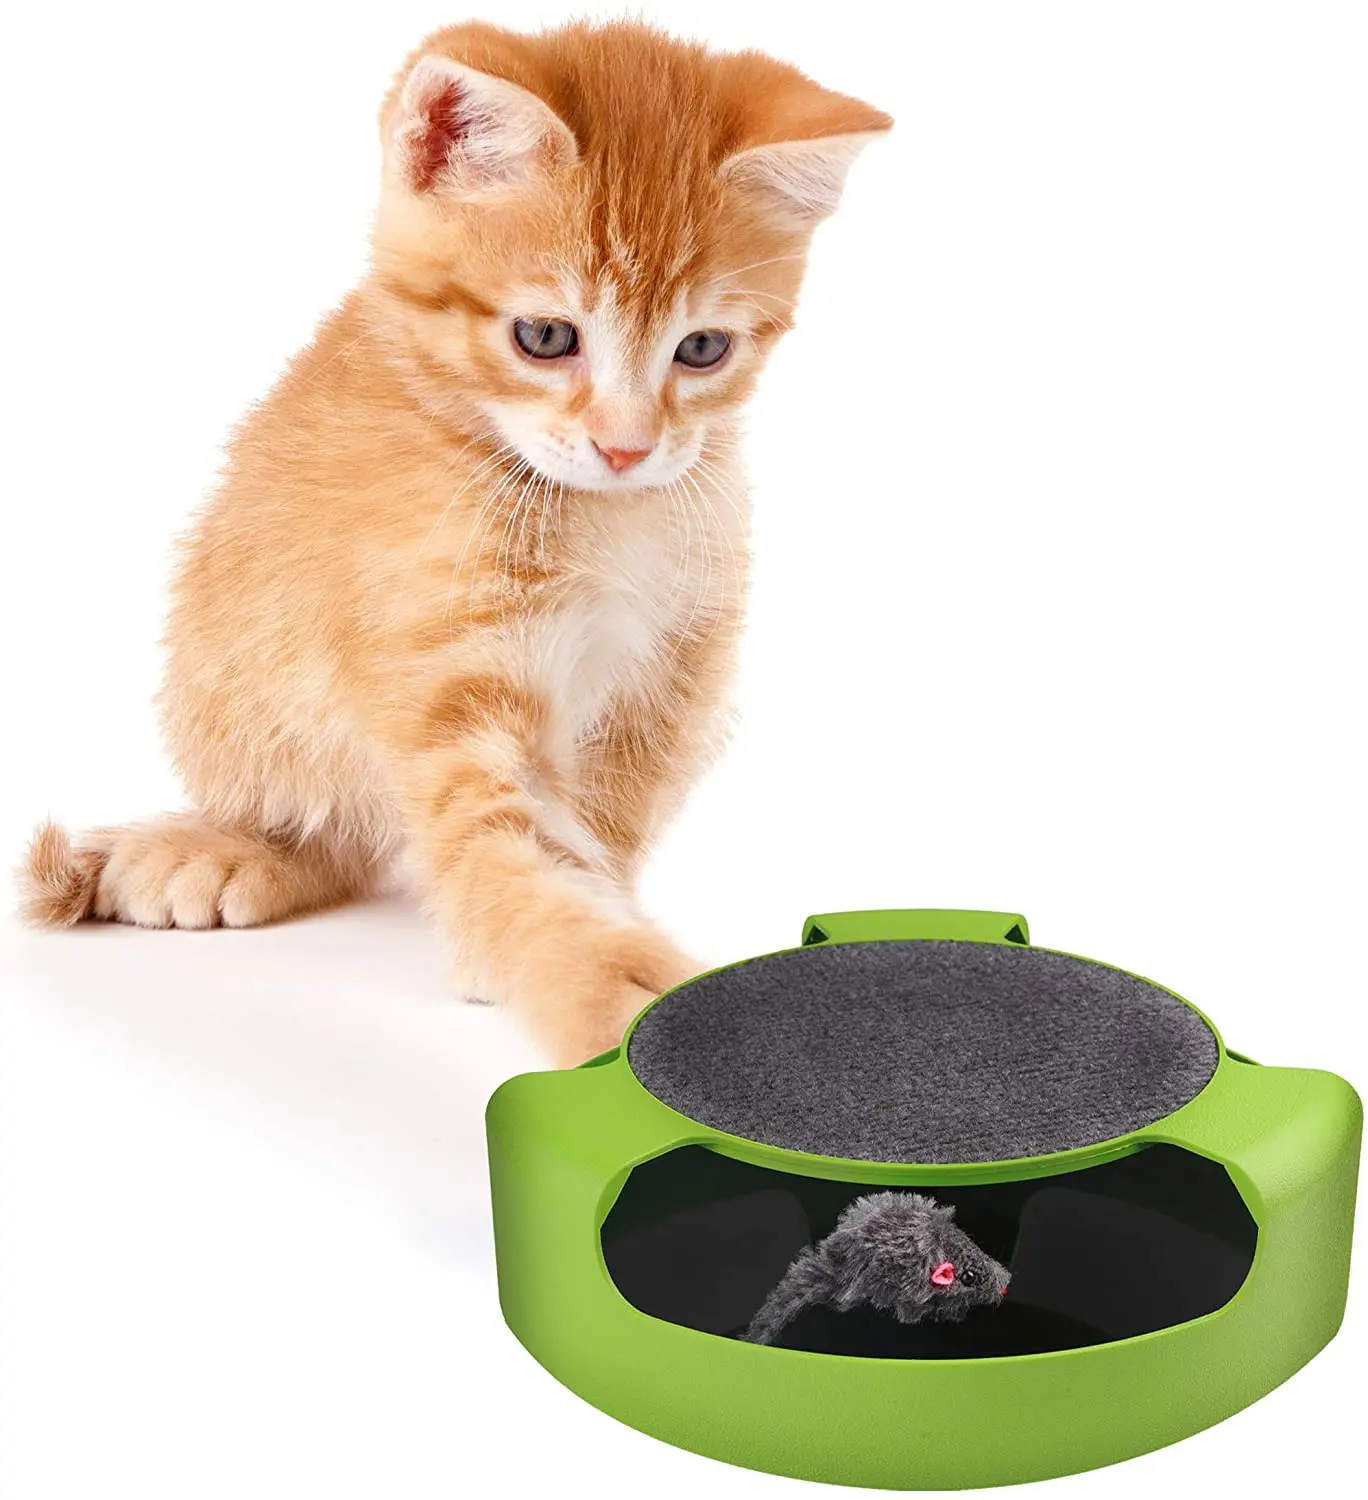 

New Design Moving Mouse Cat Interactive Toy Kitten Catch Rotating Scratch Cat Chase Toy